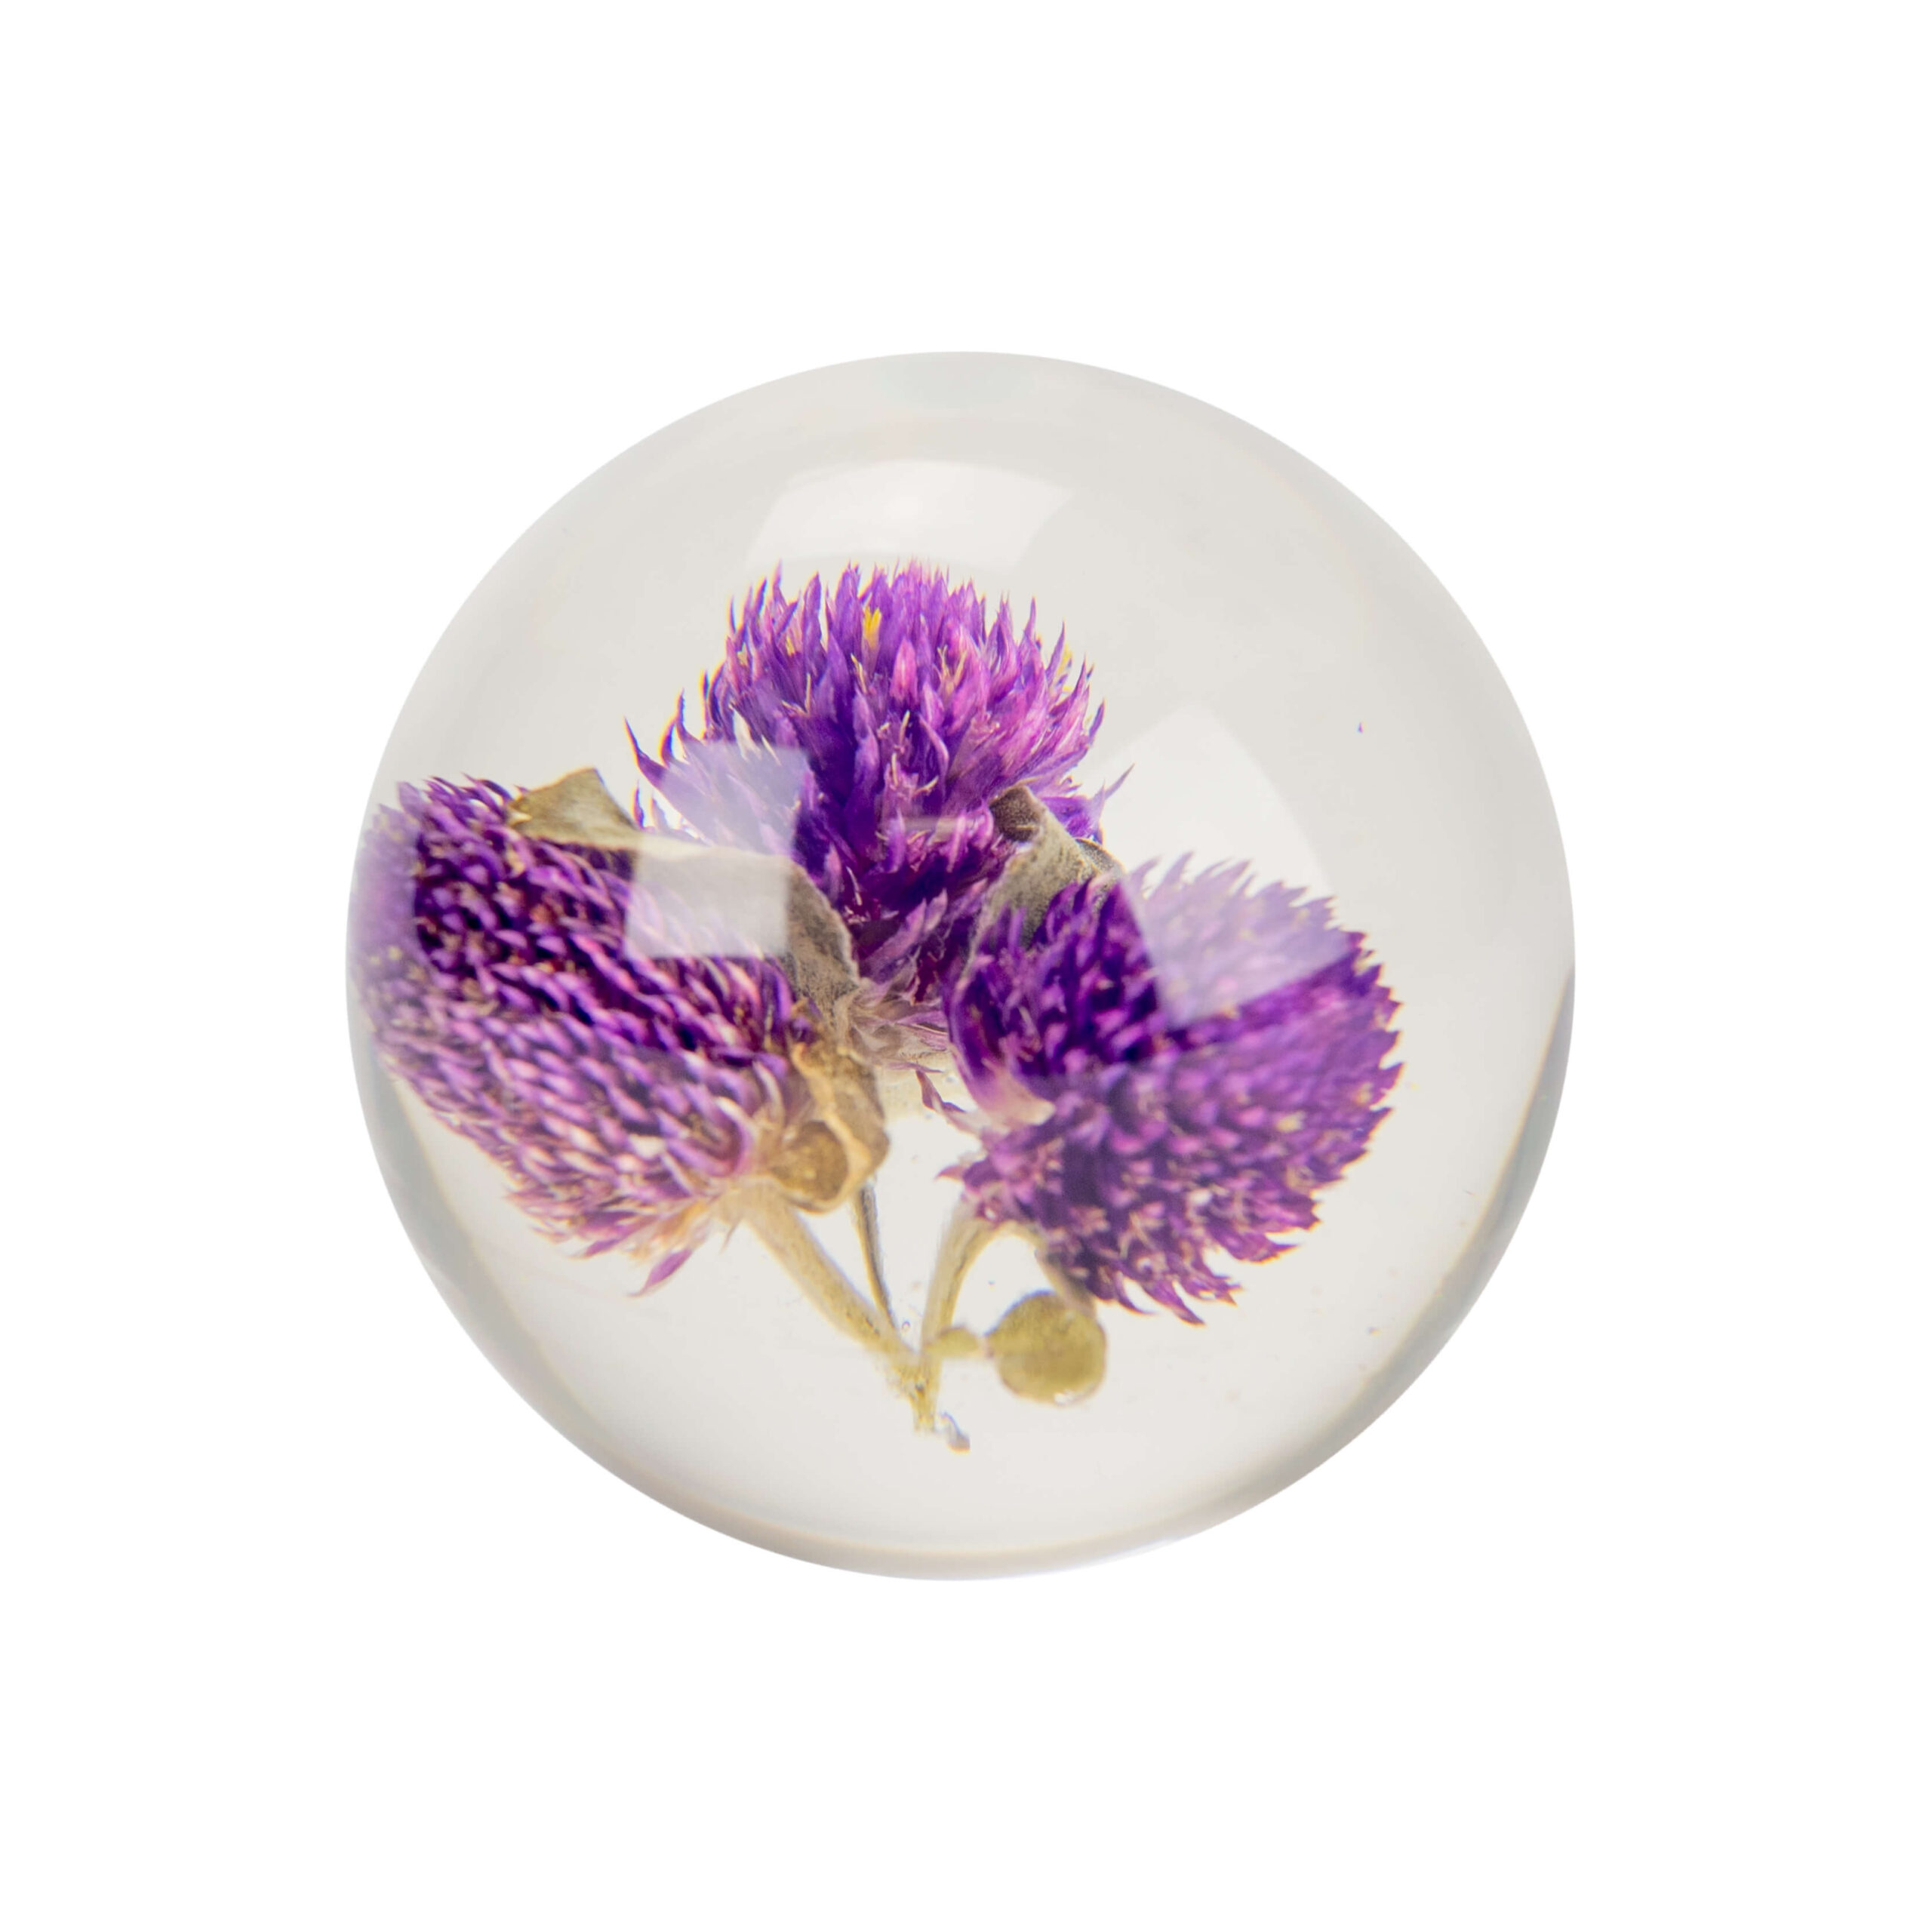 Dried Globe Amaranth Floral Culture Paperweight suspended in an acrylic ball.